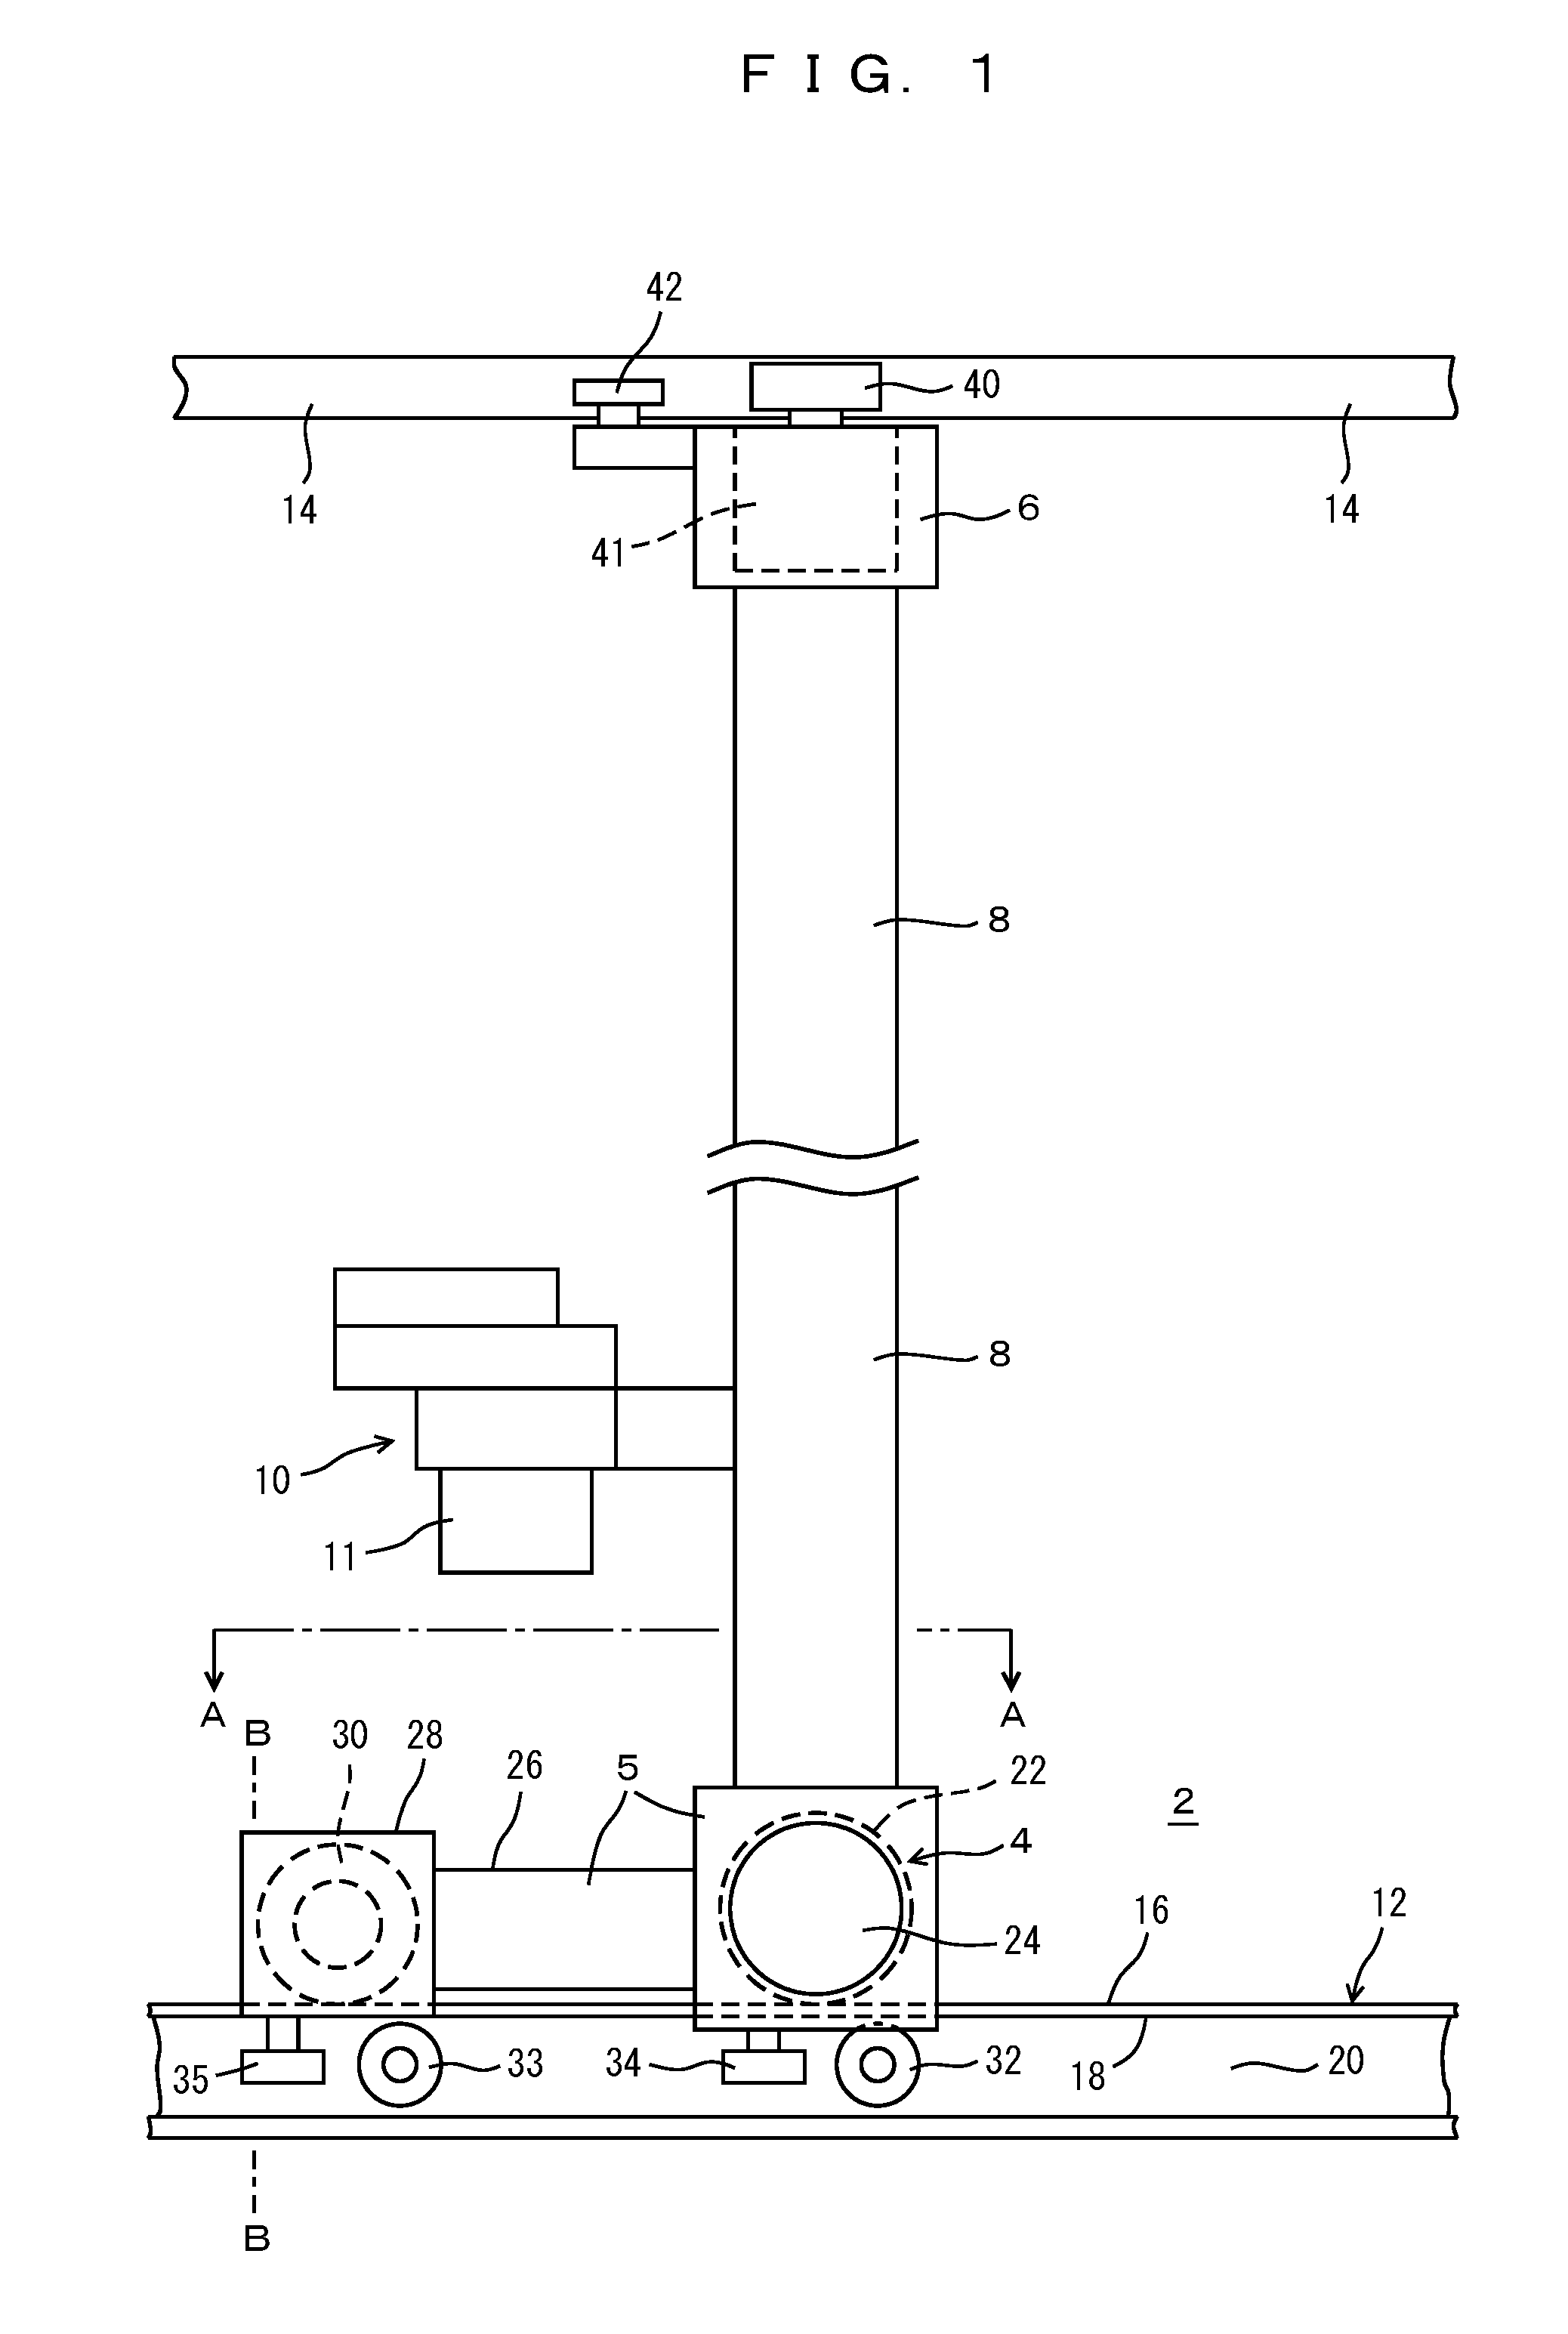 Stacker crane and method for operating same